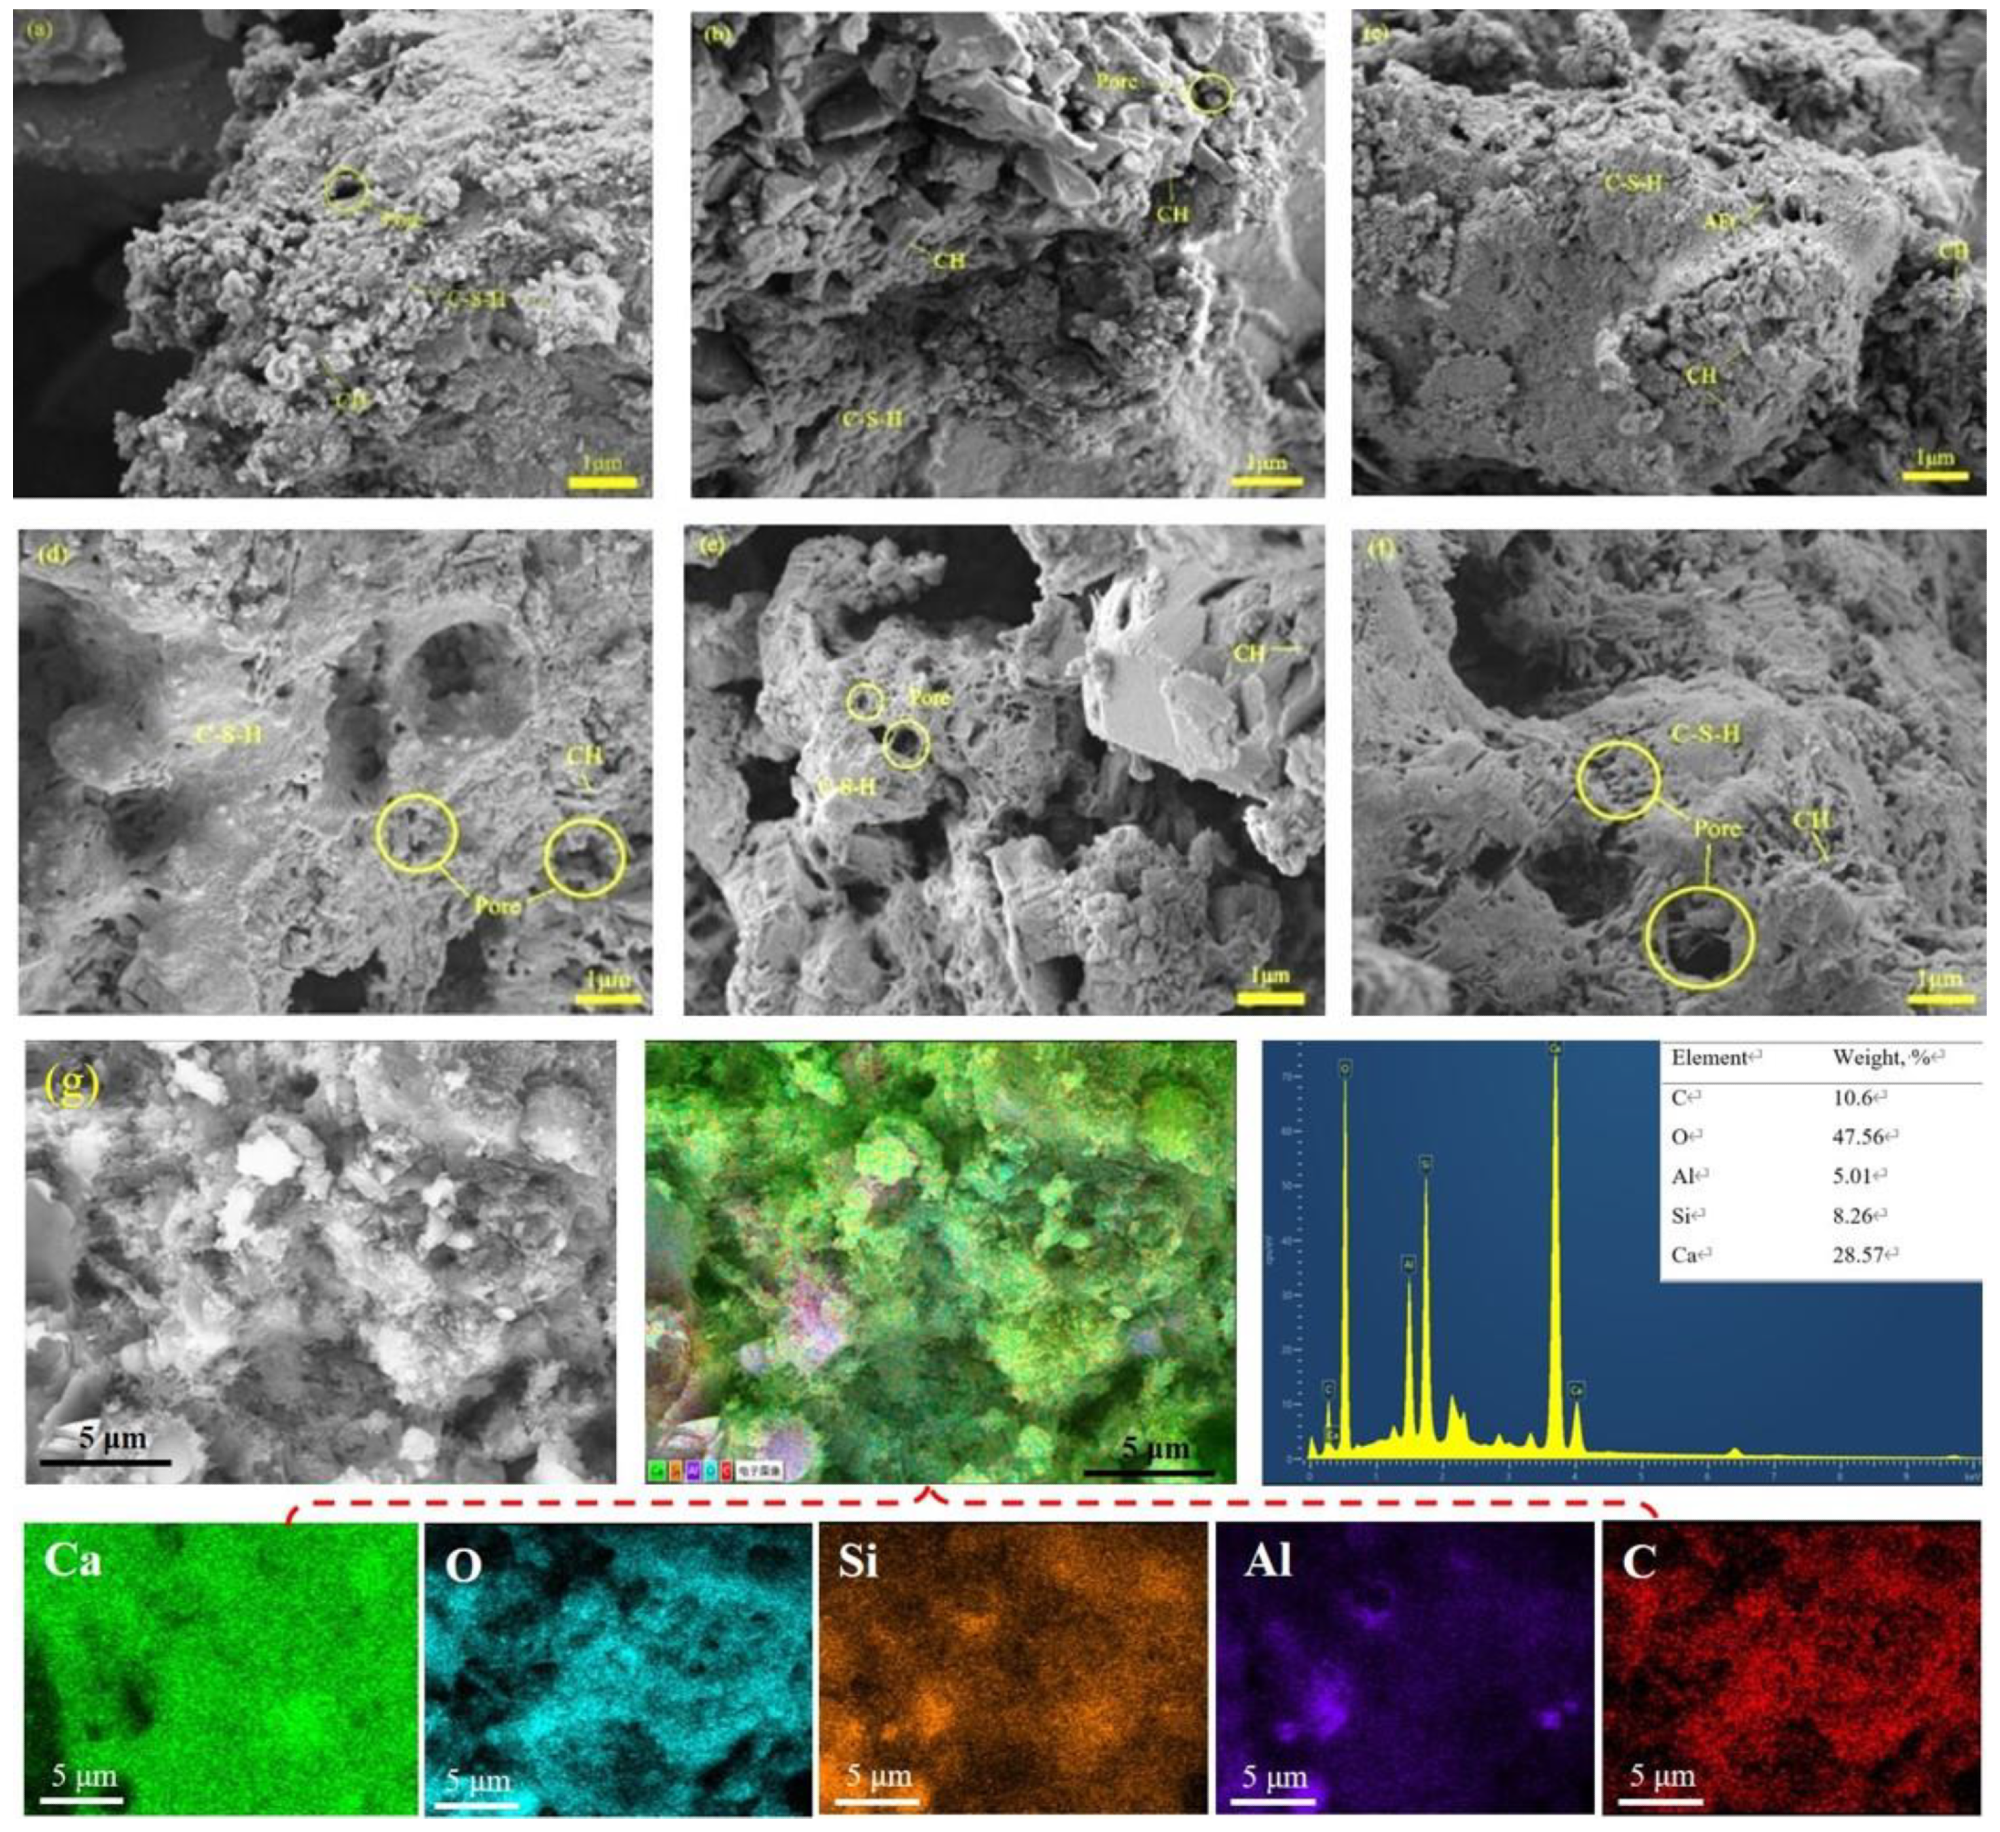 SEM images of various cement specimens, (a) PC0; (b) PC0.2; (c) PC0.4; (d) PC0.6; (e) PC0.8; (f) PC1.0; and (g) EDS elemental mapping of PC0.6.